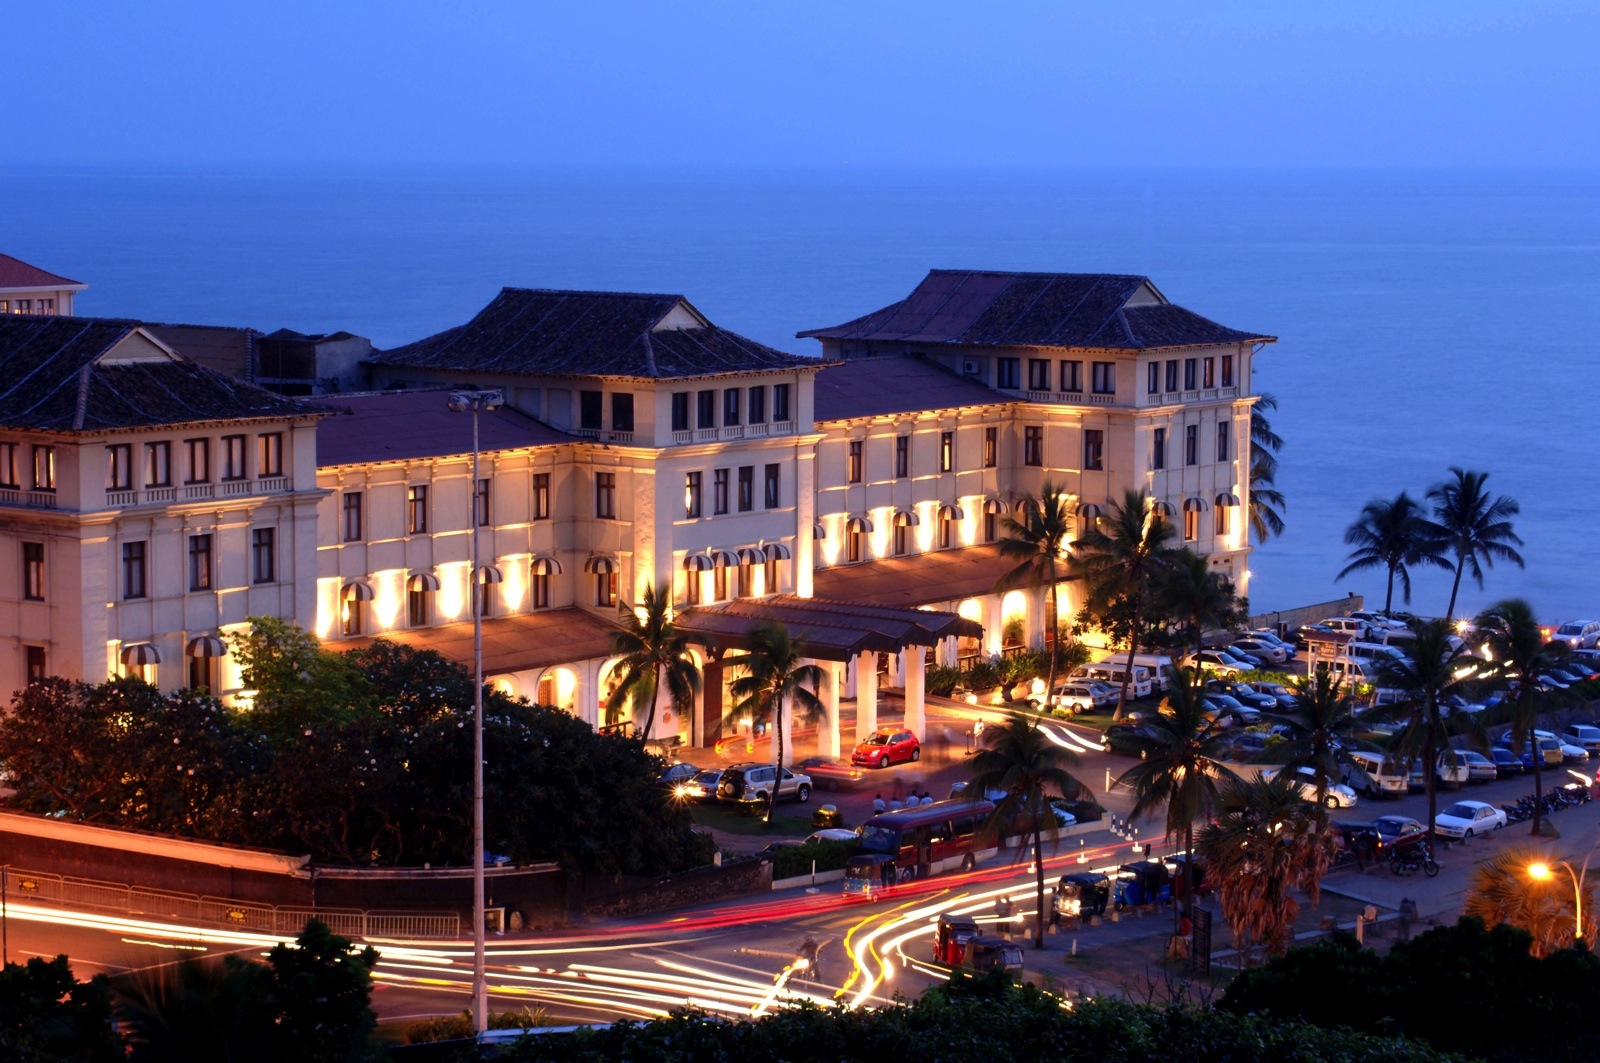 Galle Face Hotel Travel Gallery